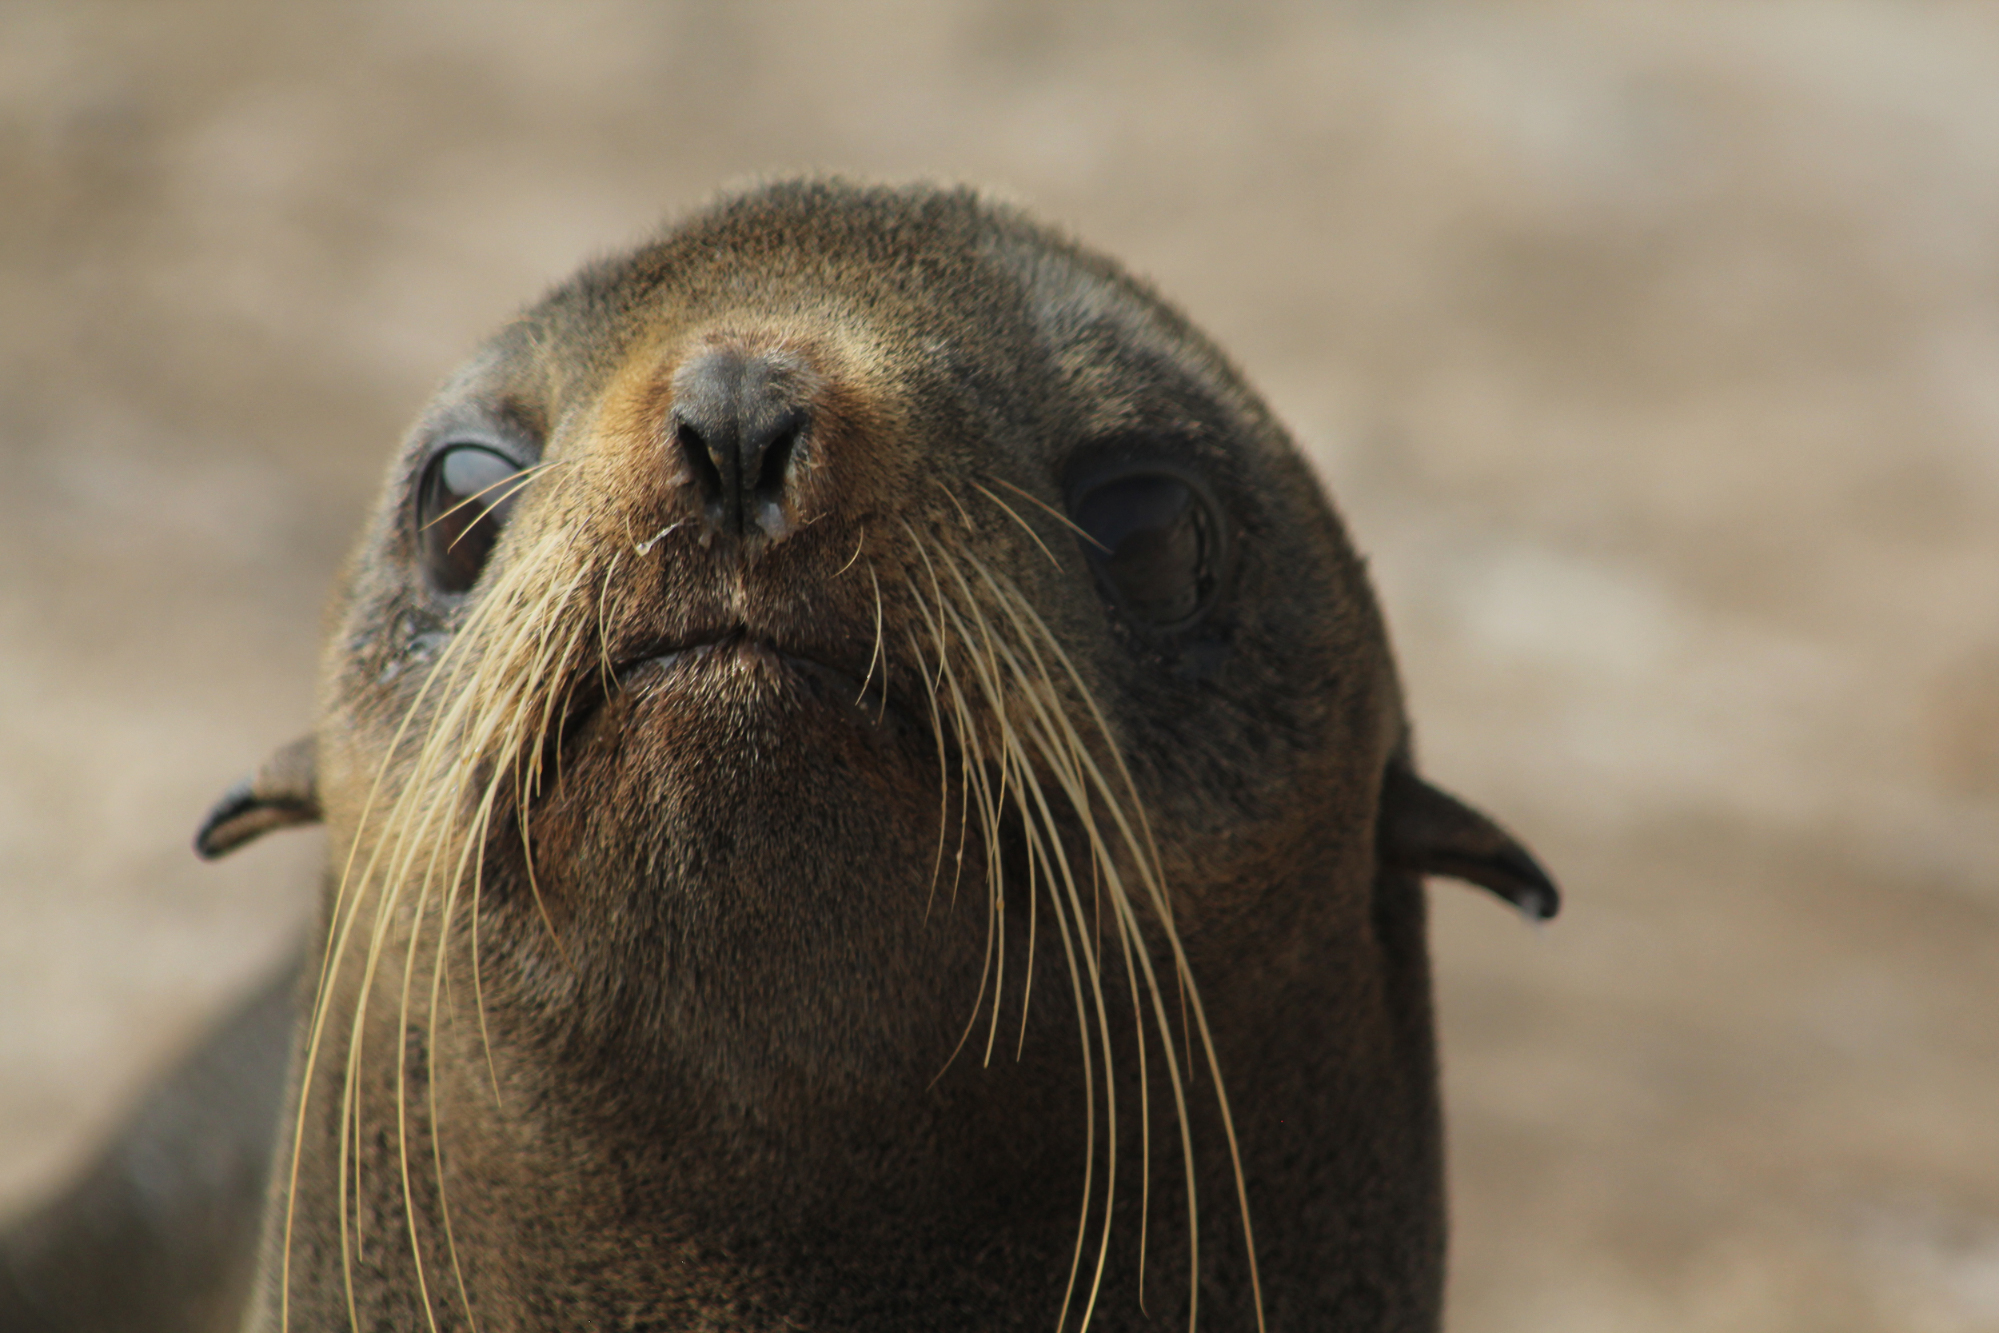 Image: A Seal’s Whiskers Record a History of Foraging, Motherhood, and Stress